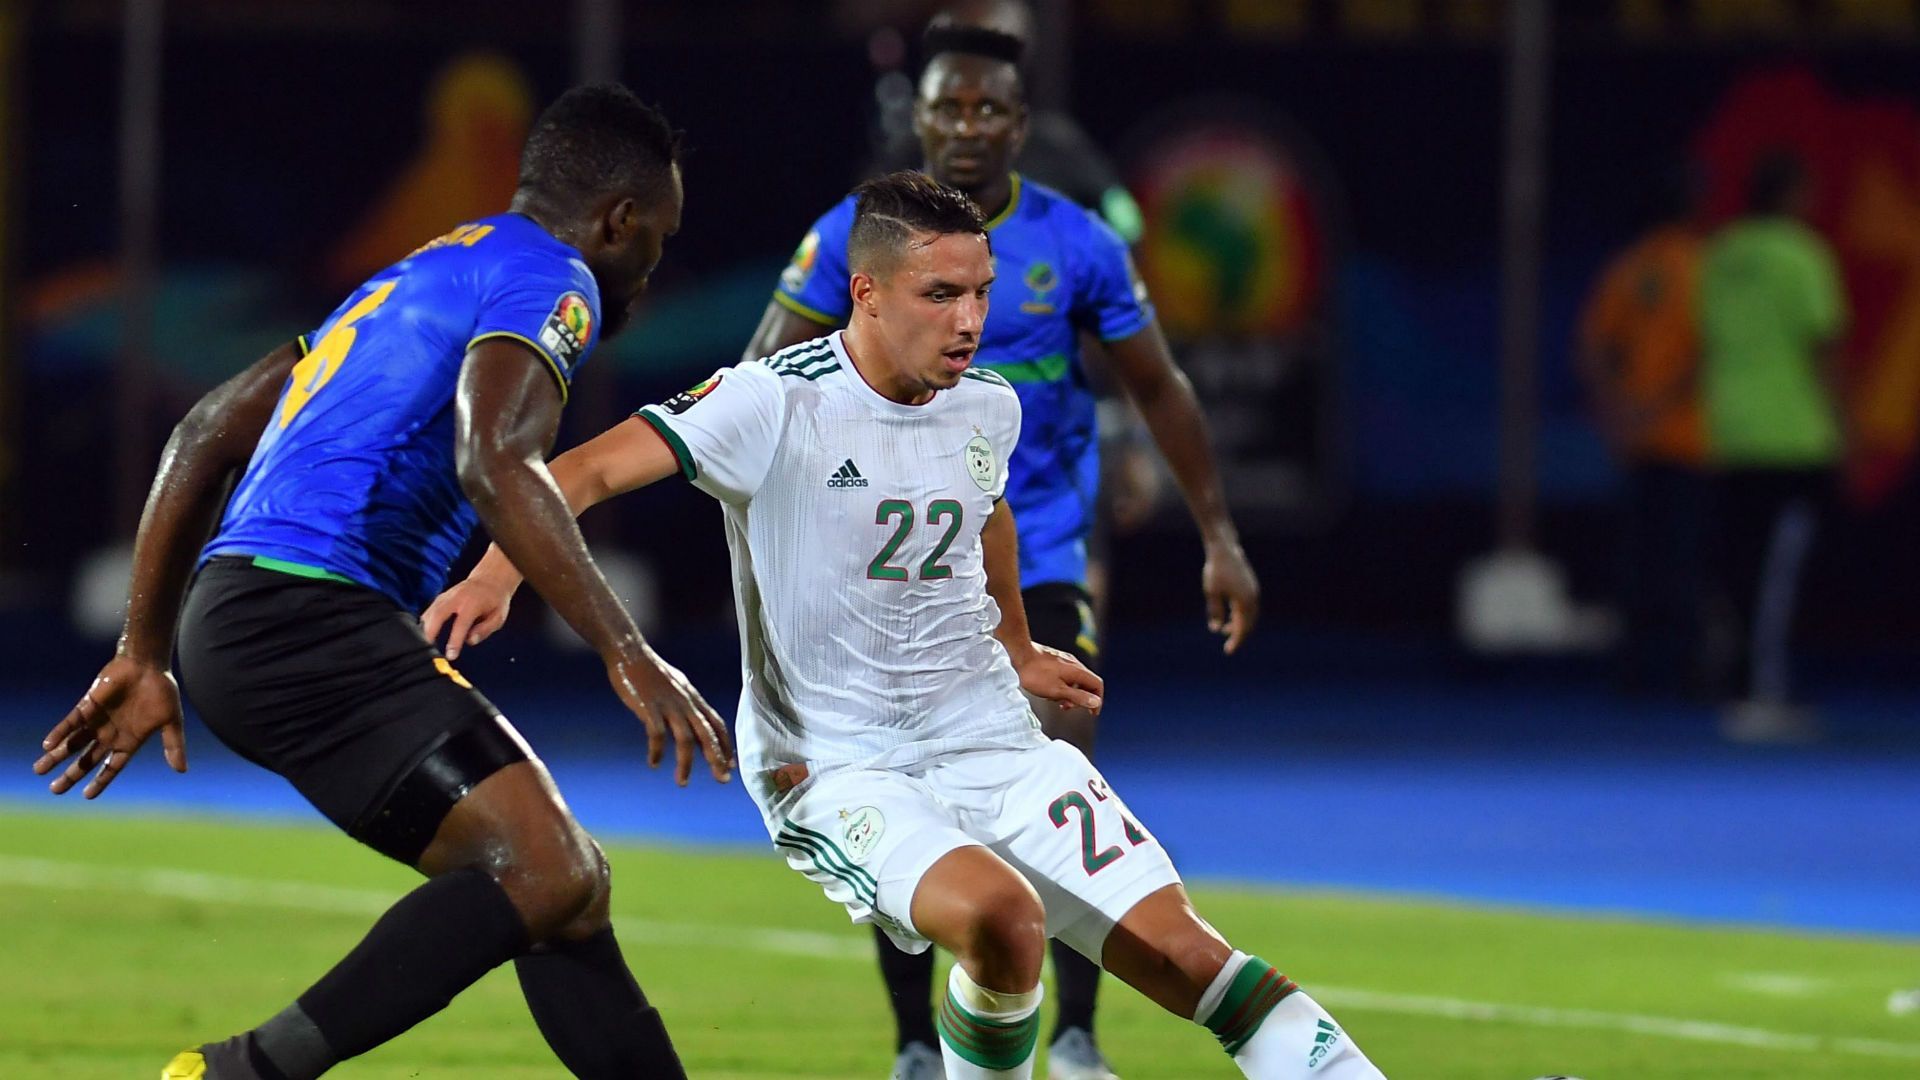 Afcon 2019: Algeria's Ismael Bennacer named best player in group stage